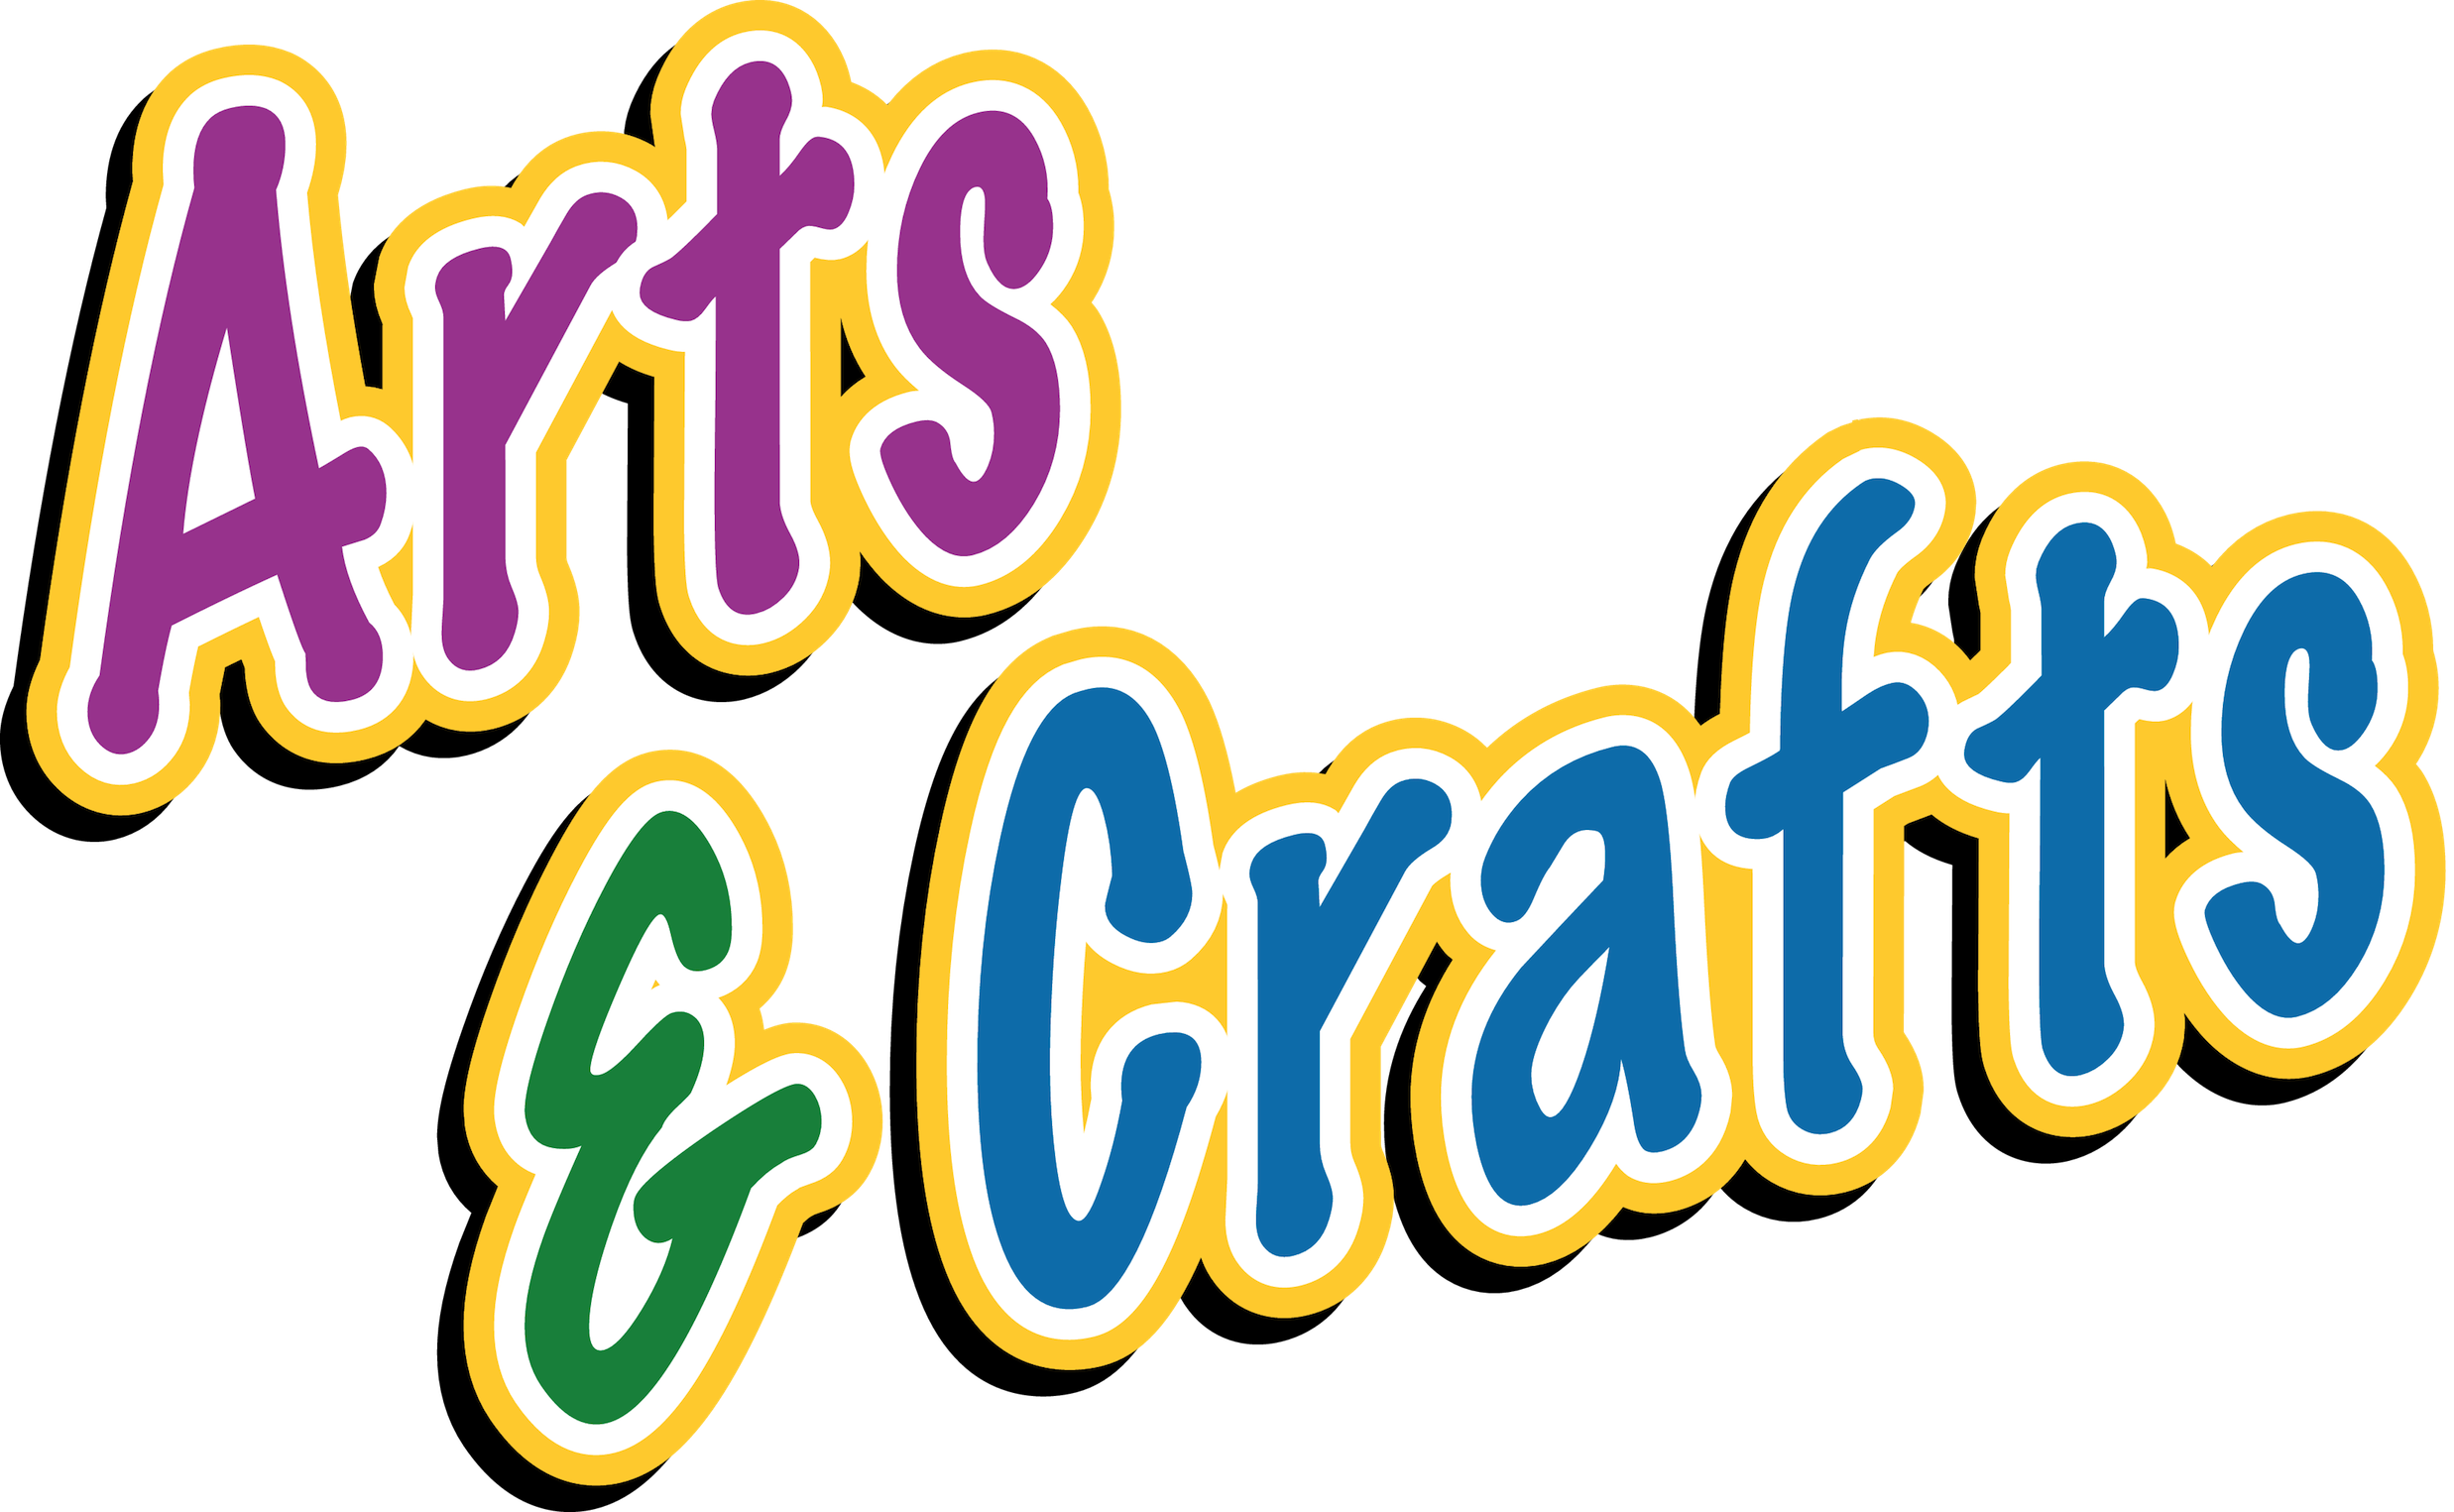 Words Arts And Crafts Clipart Free Clip Art Images